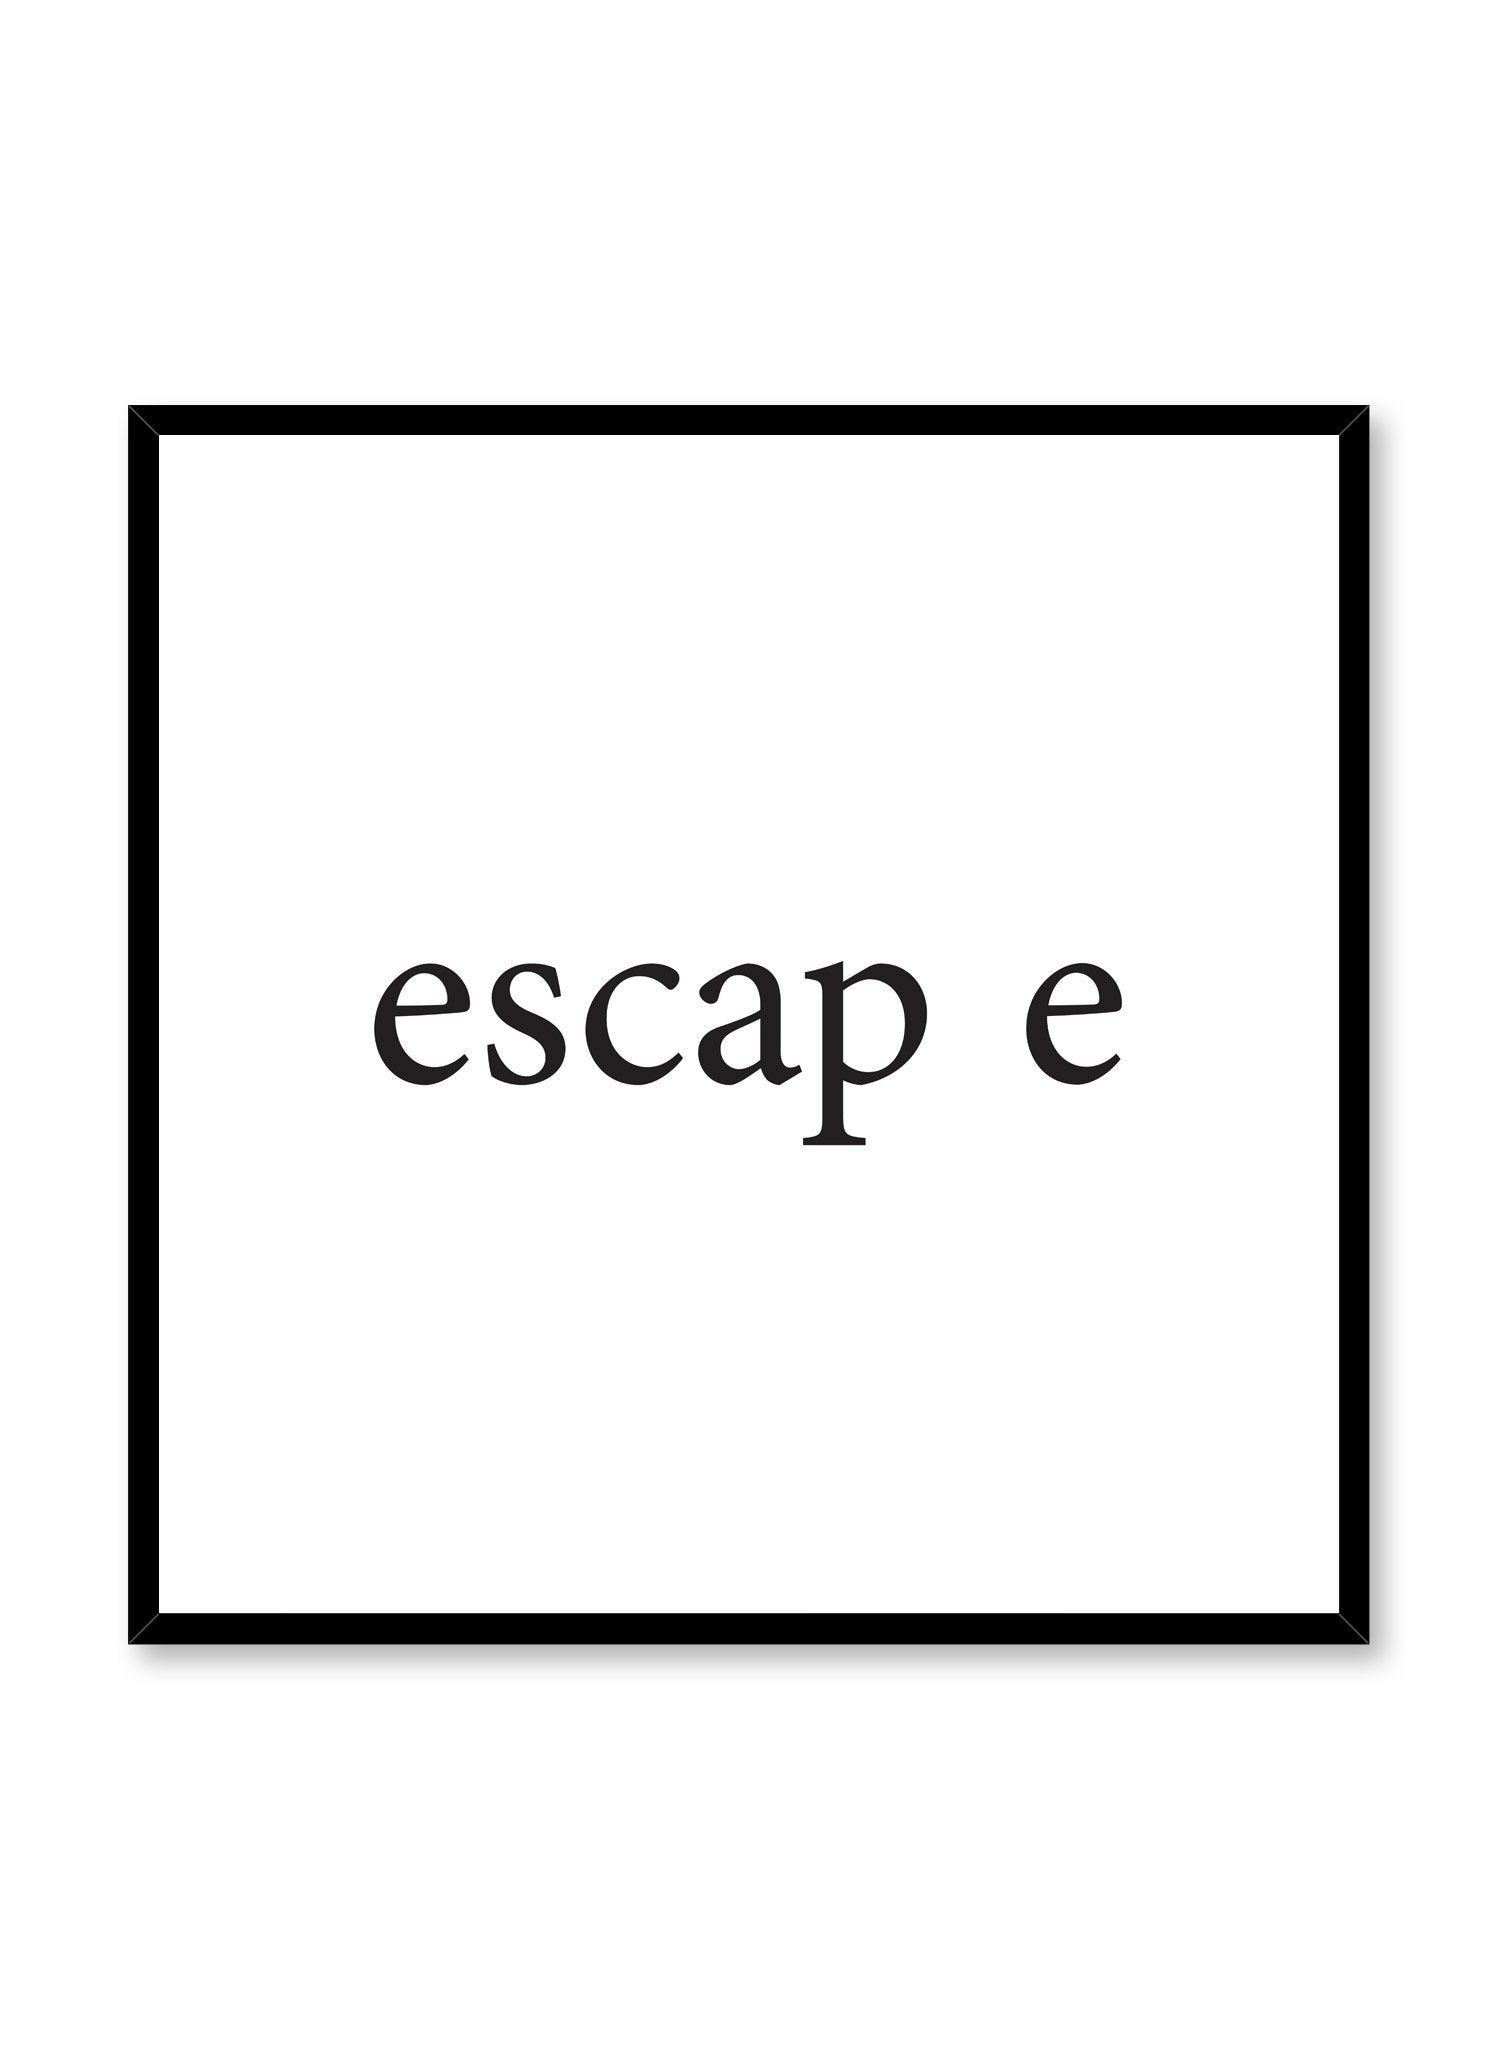 Scandinavian poster with black and white graphic typography design of Escape text by Opposite Wall